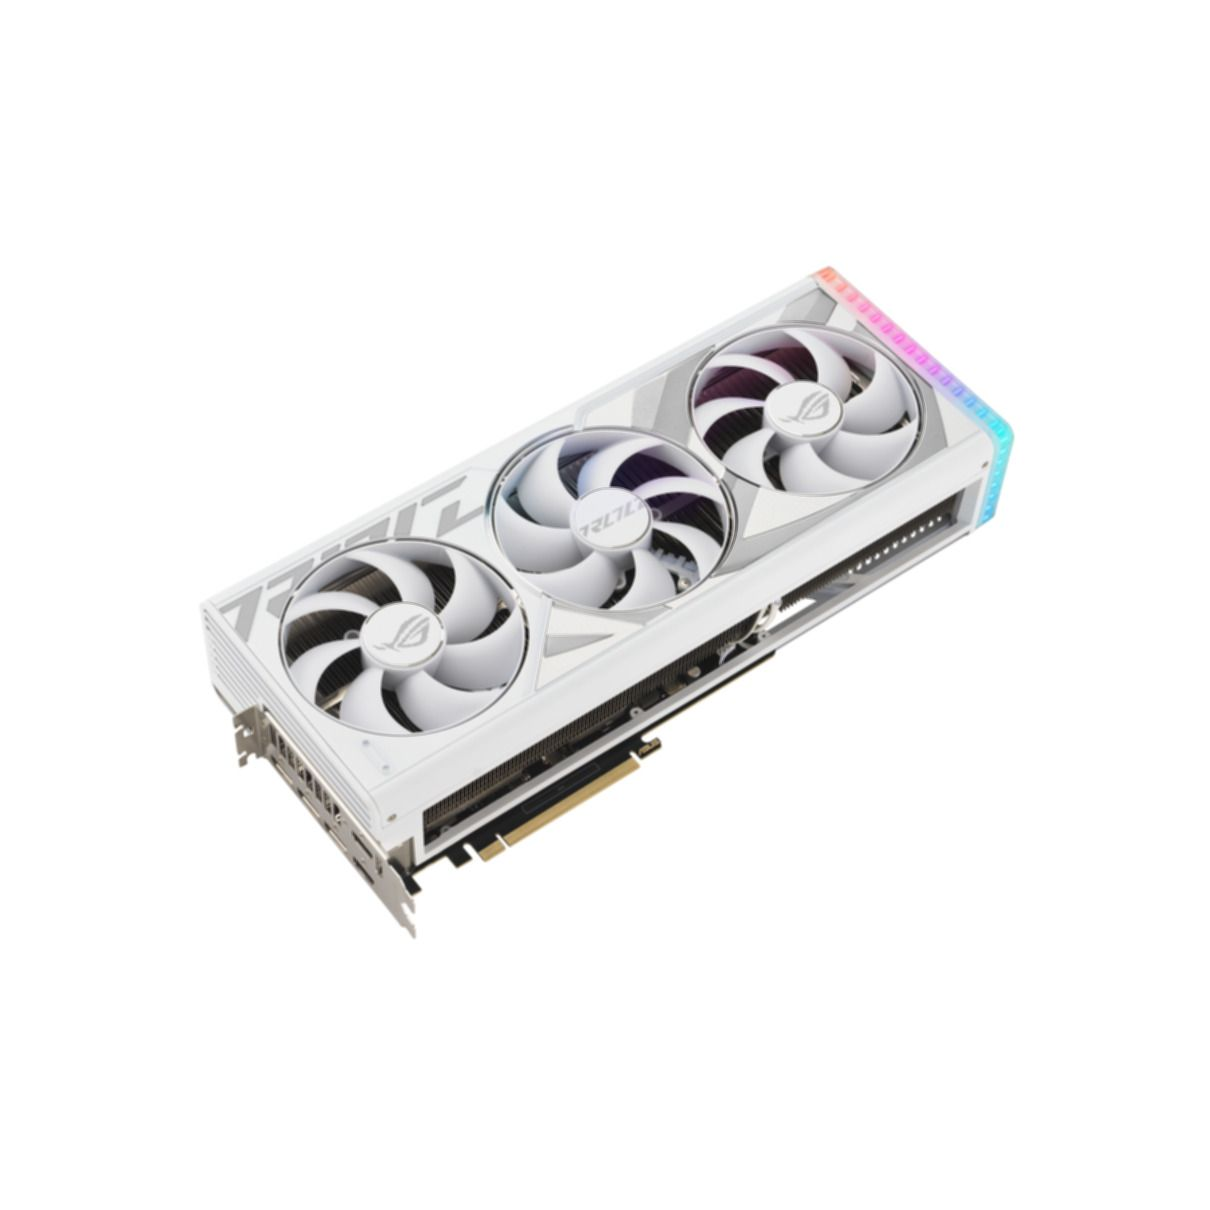 4090 card) RTX ASUS GeForce White Graphics (NVIDIA,